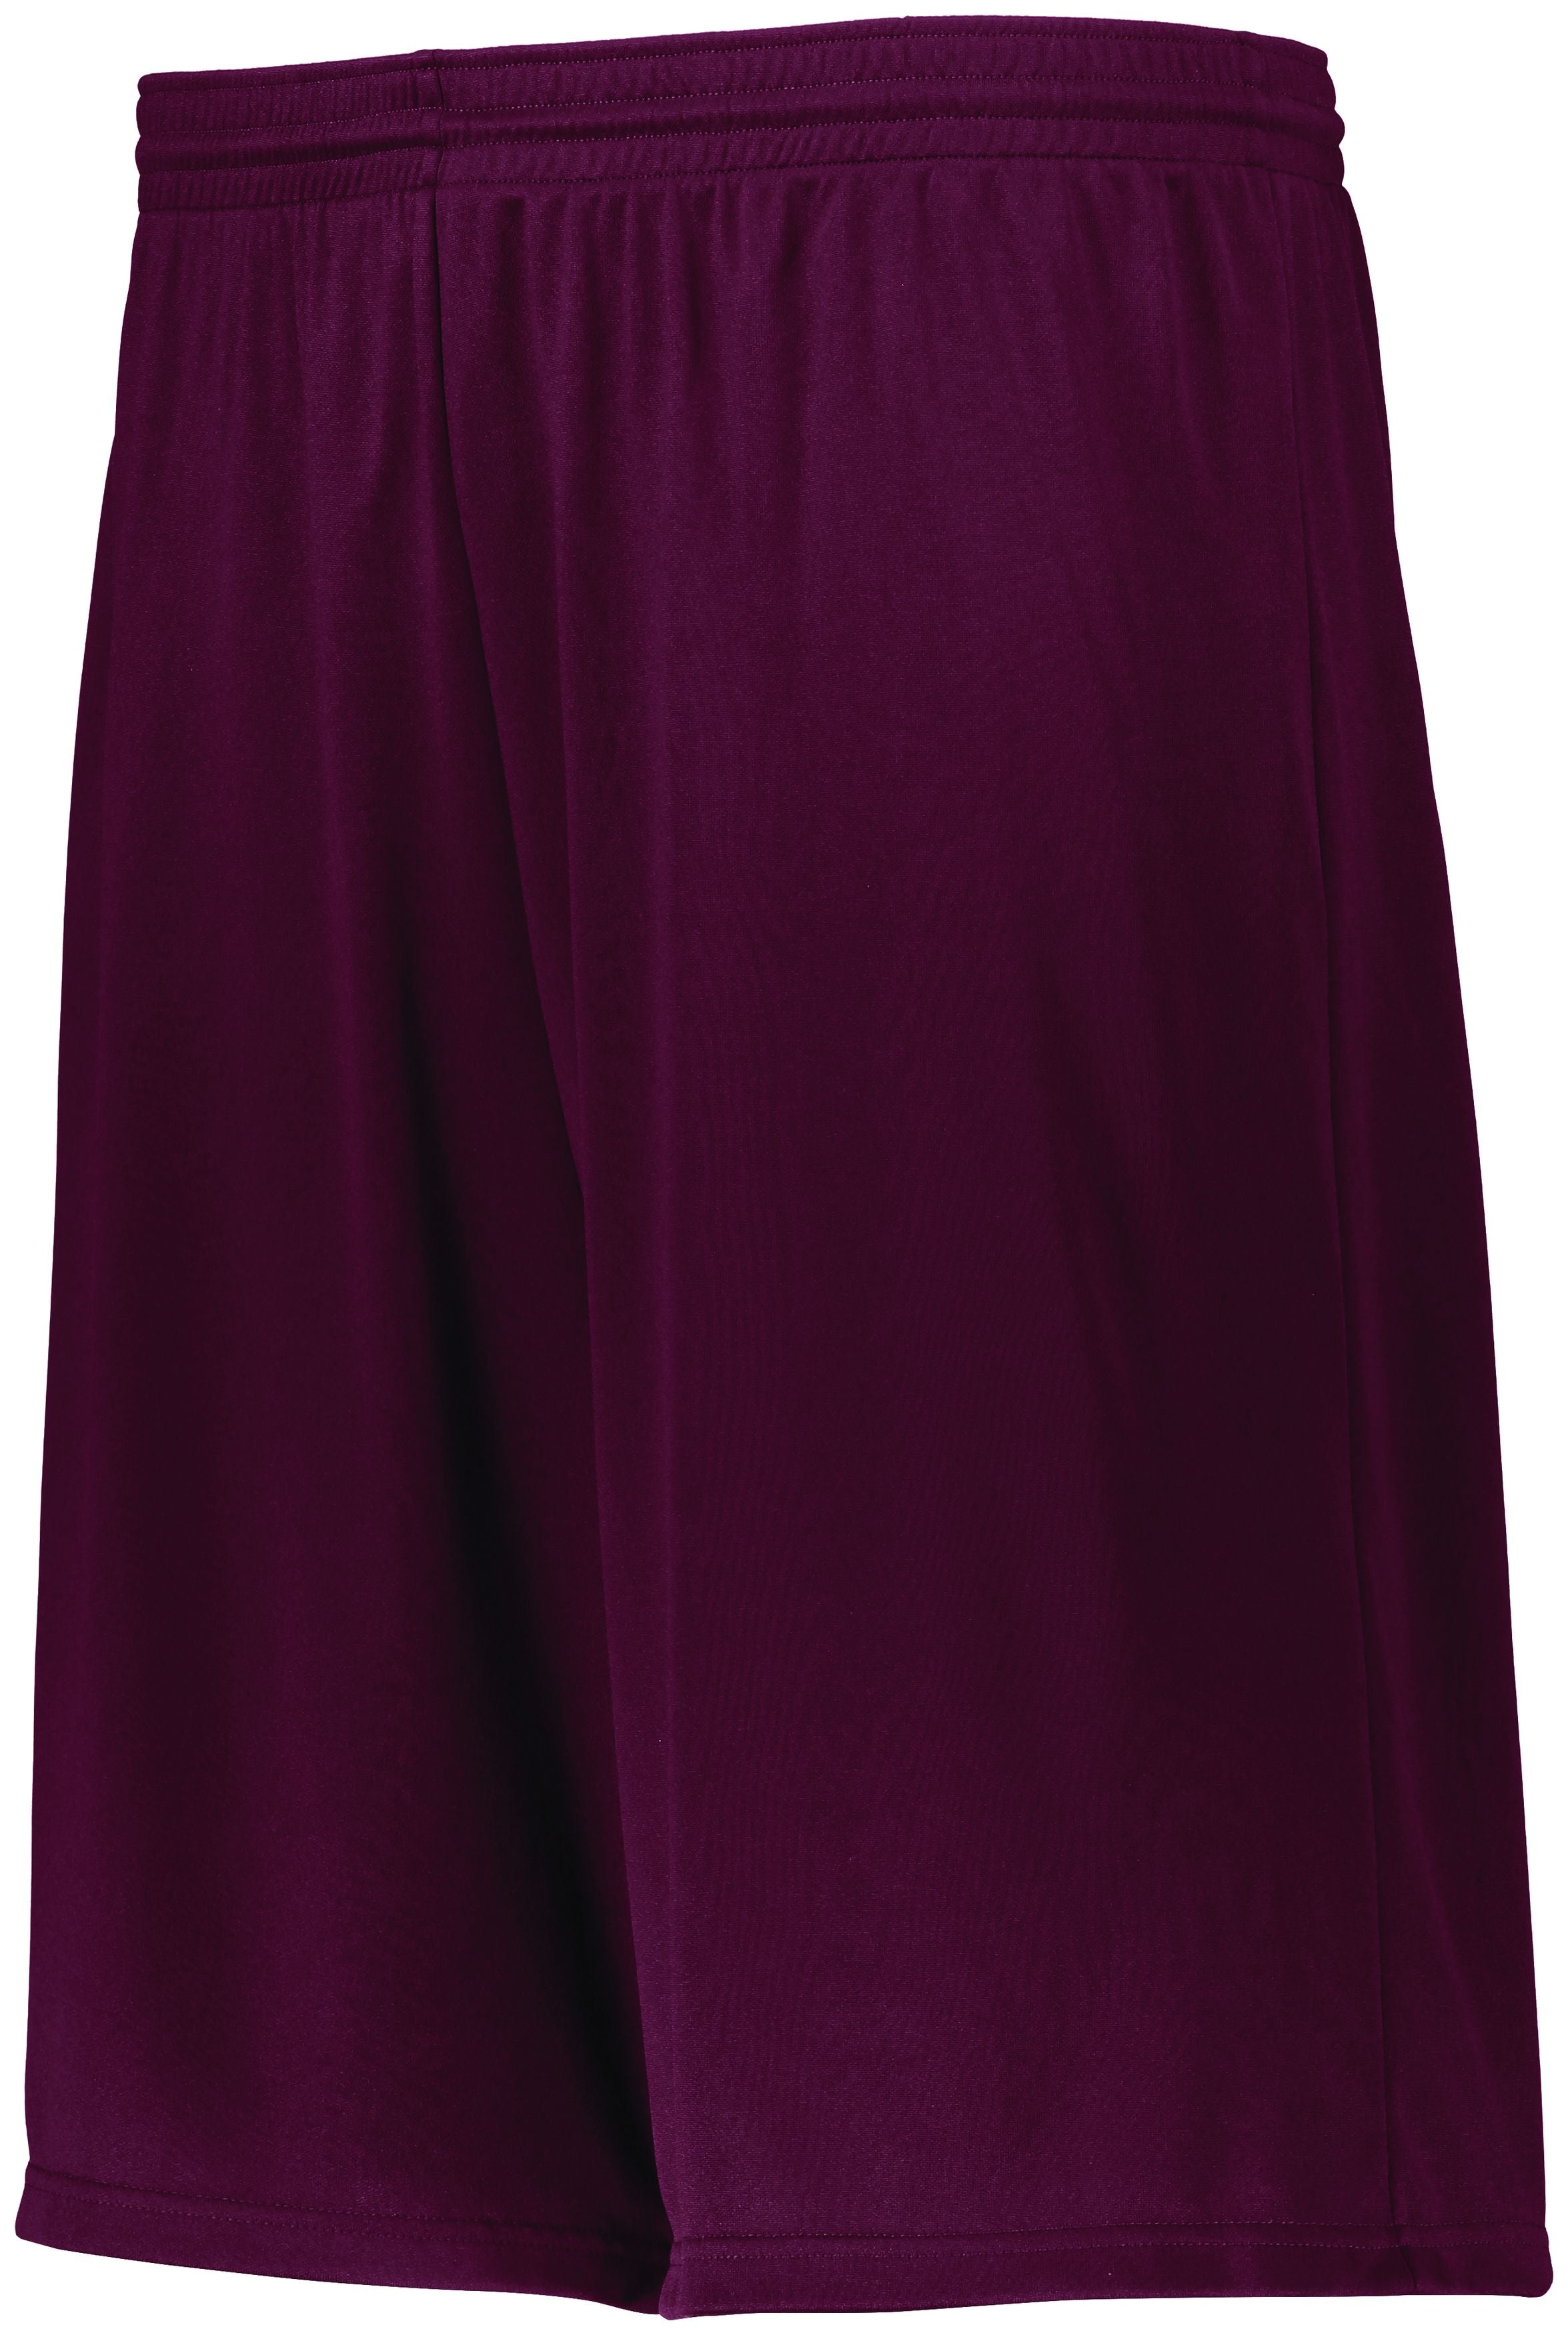 Augusta Sportswear Longer Length Attain Wicking Shorts in Maroon  -Part of the Adult, Adult-Shorts, Augusta-Products product lines at KanaleyCreations.com